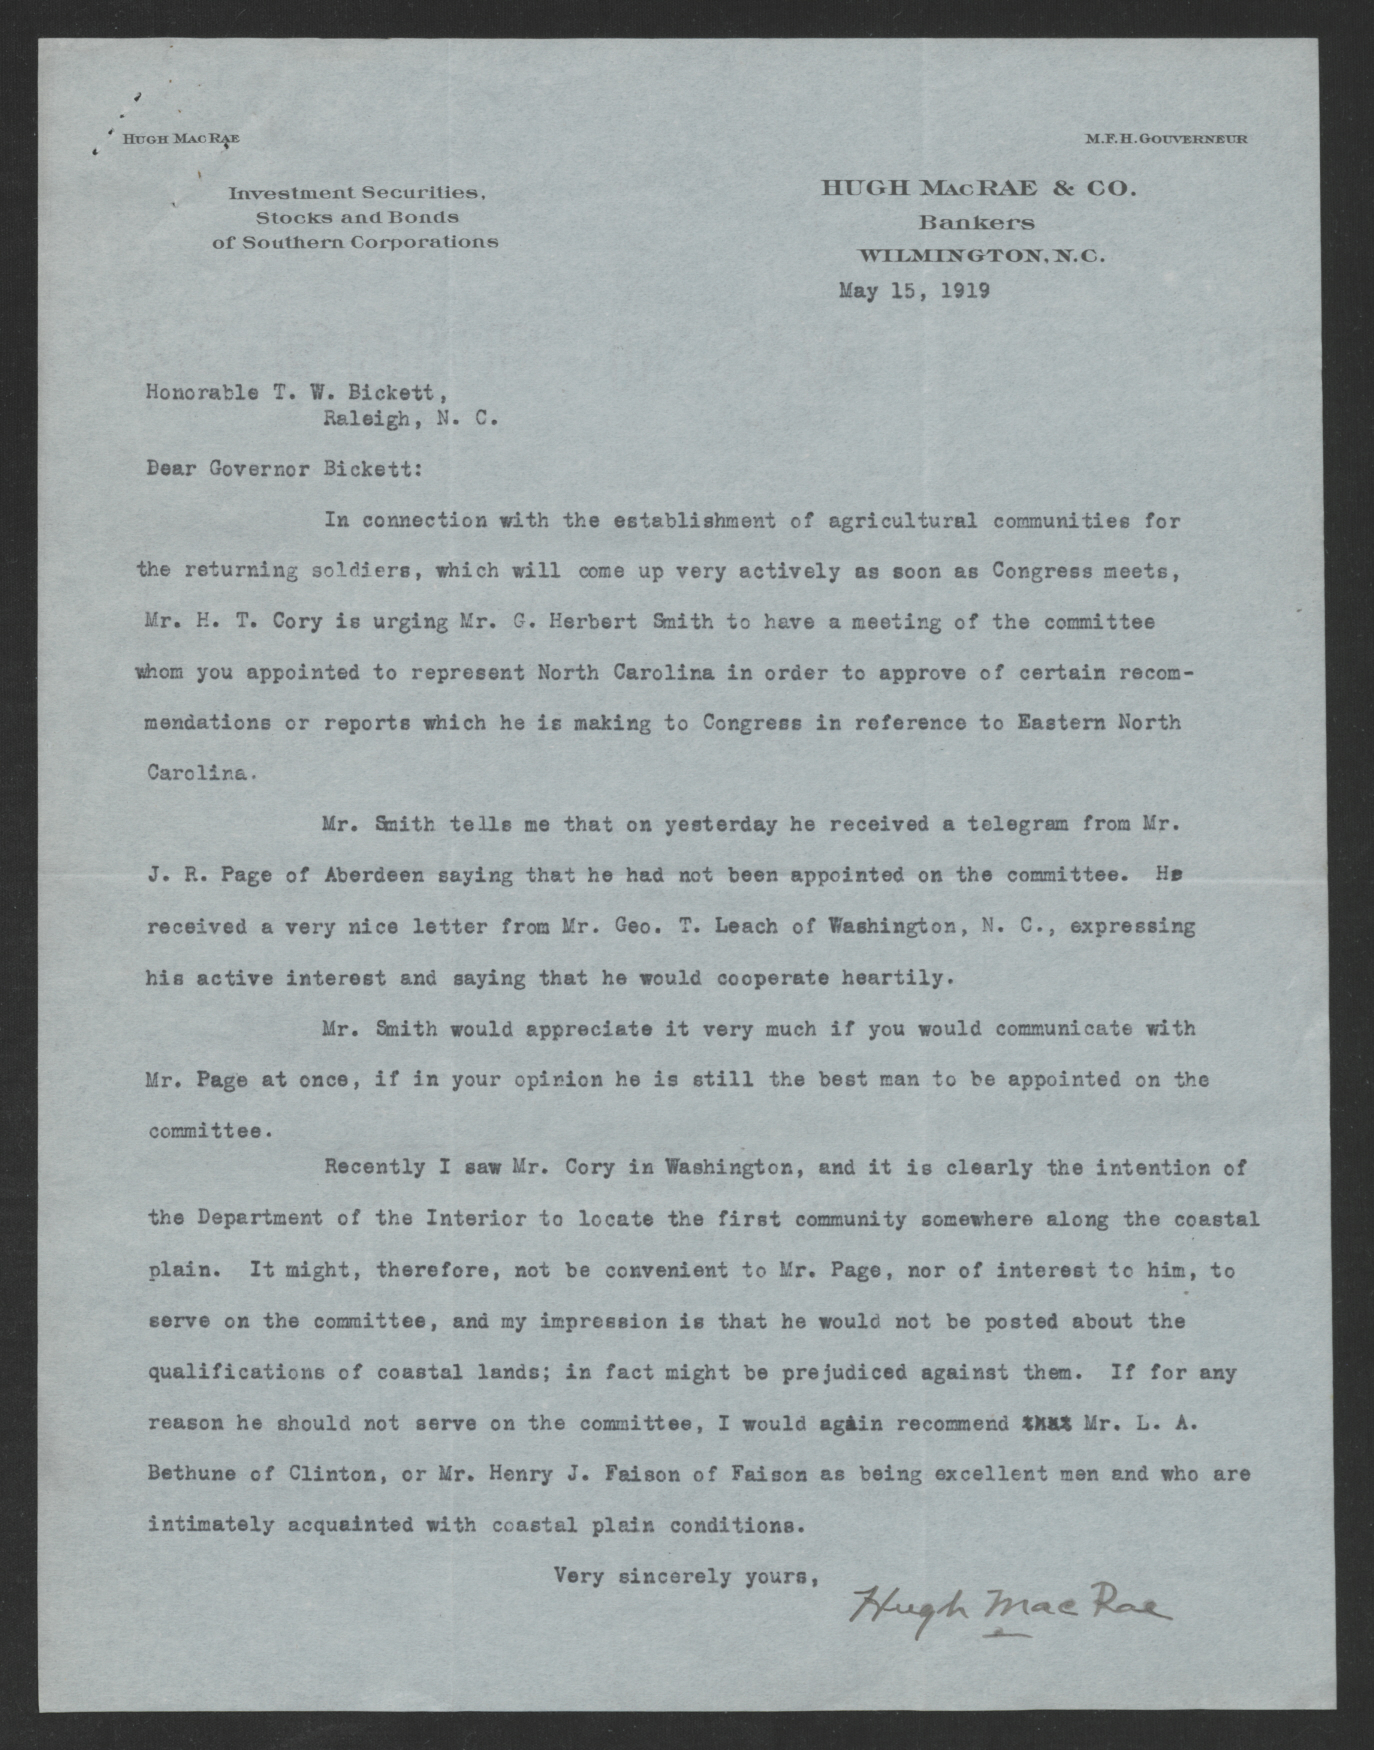 Letter from Hugh MacRae to Thomas W. Bickett, May 15, 1919